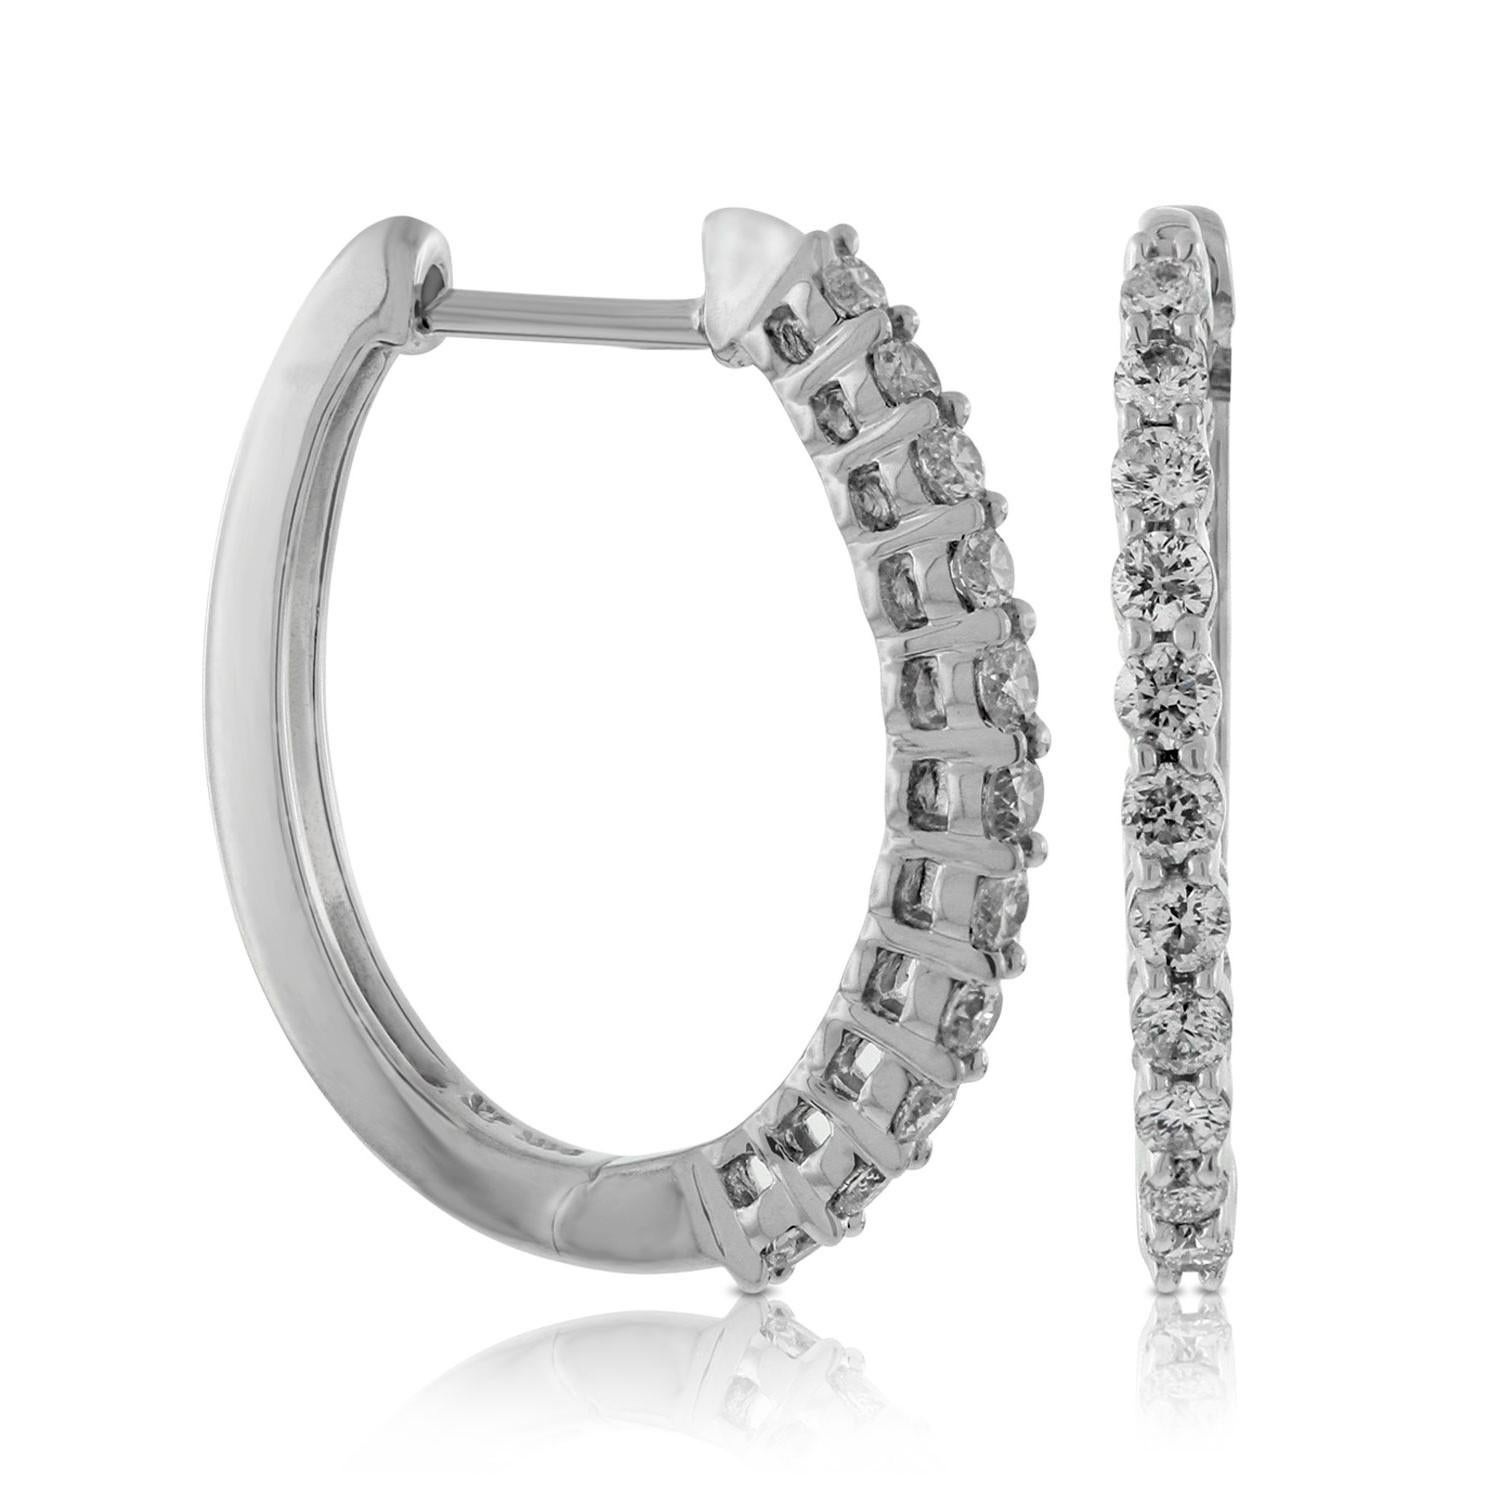 Nothing says luxury like an incredible pair of diamond round hoop earrings. These stunning brightly polished 14 karat white gold round-shaped hoop earrings feature a total of 24 round brilliant cut diamonds totaling .25 carats are prong set on the